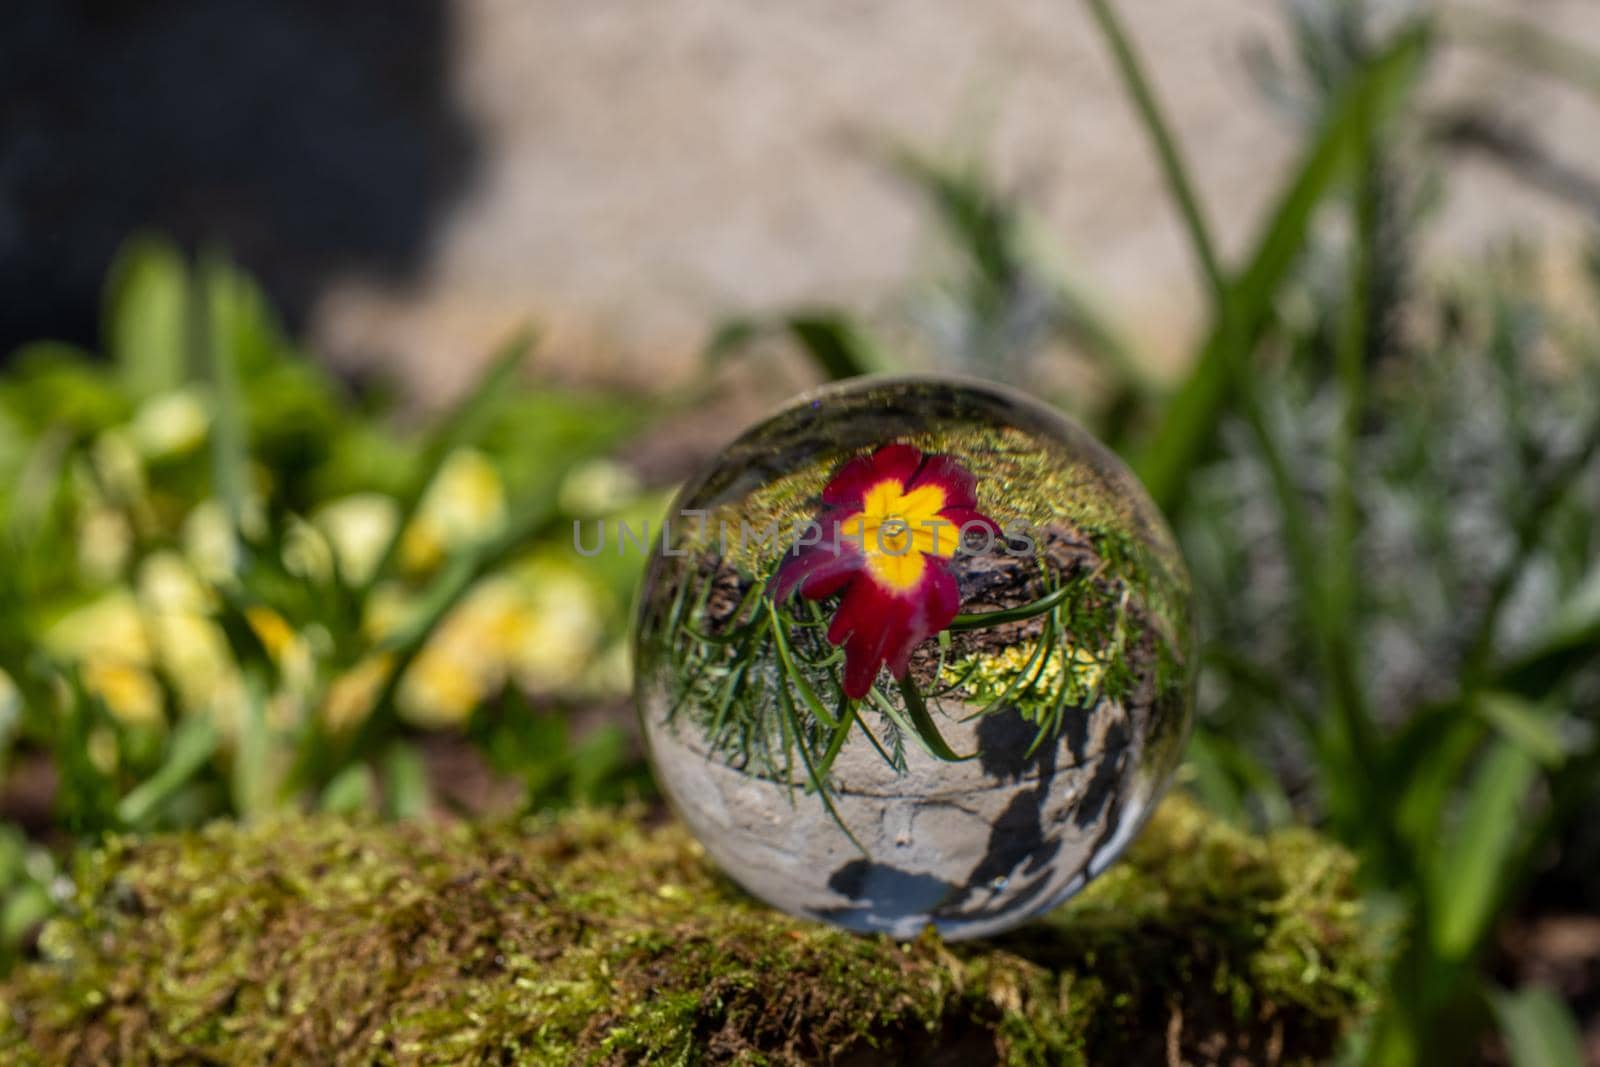 Crystal ball with red primrose blossom on moss covered stone  by reinerc